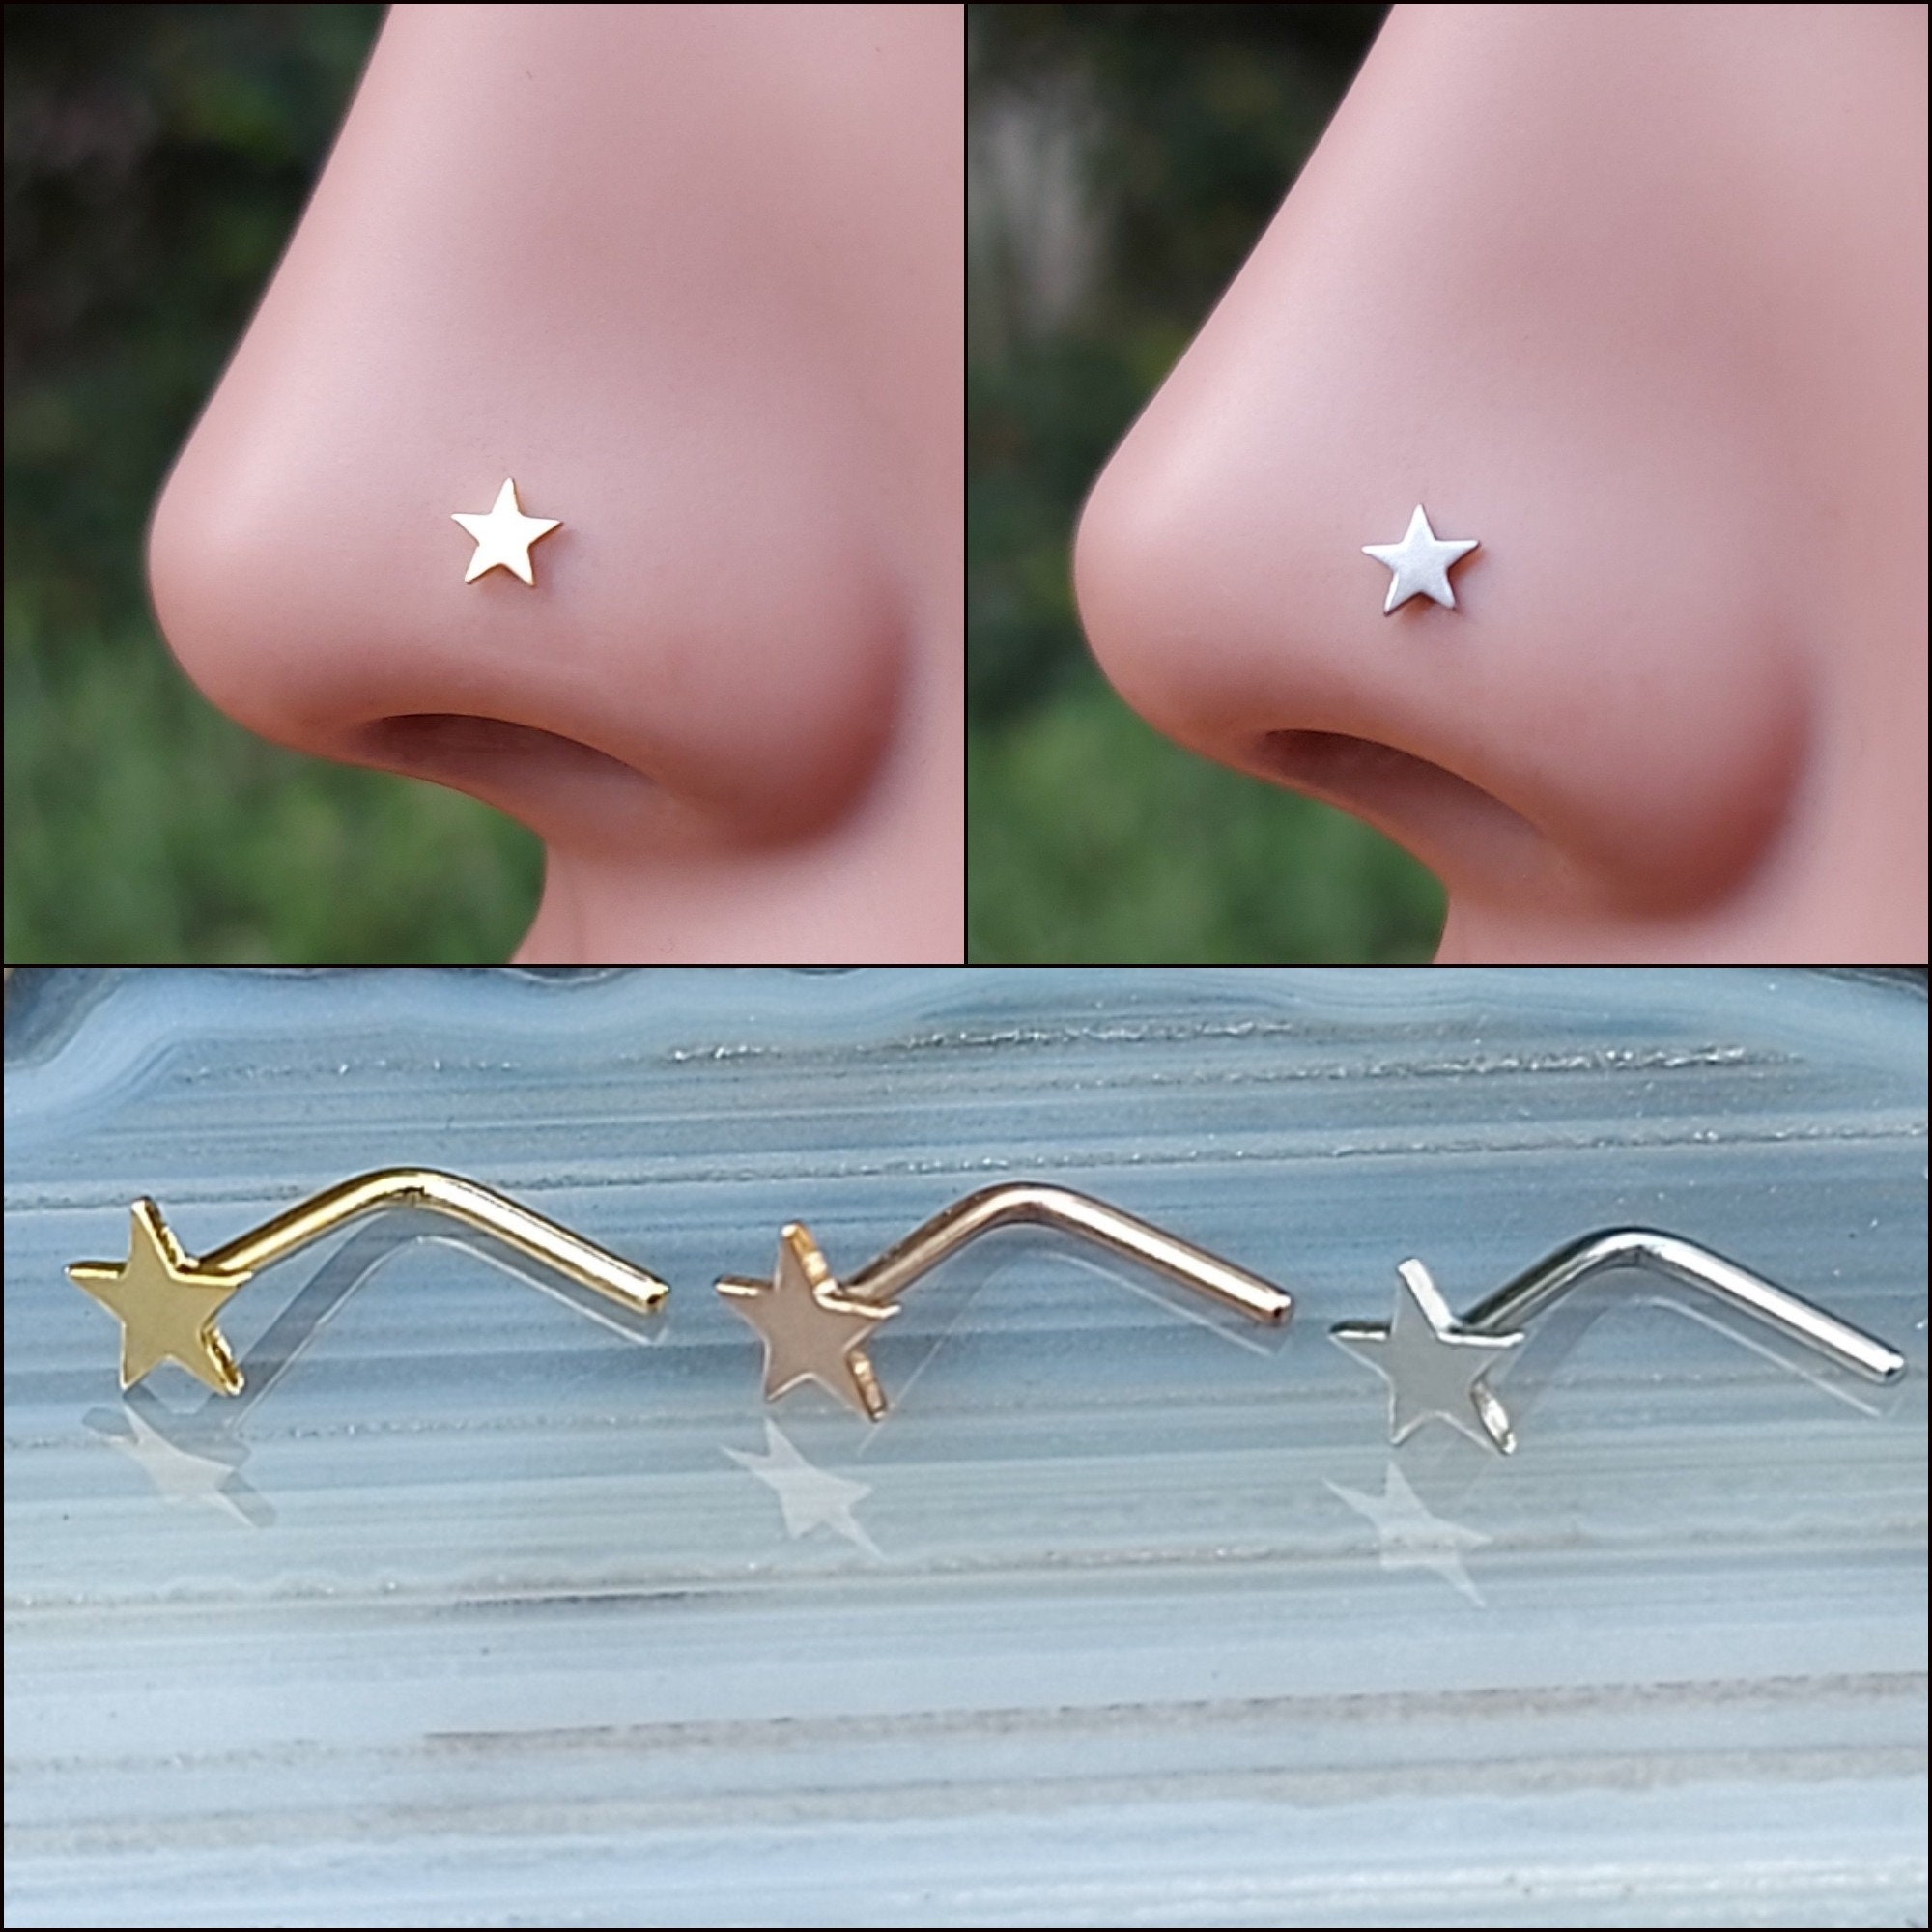 Which Nose Ring Should I Get? A Nose Piercing Guide - FreshTrends Blog